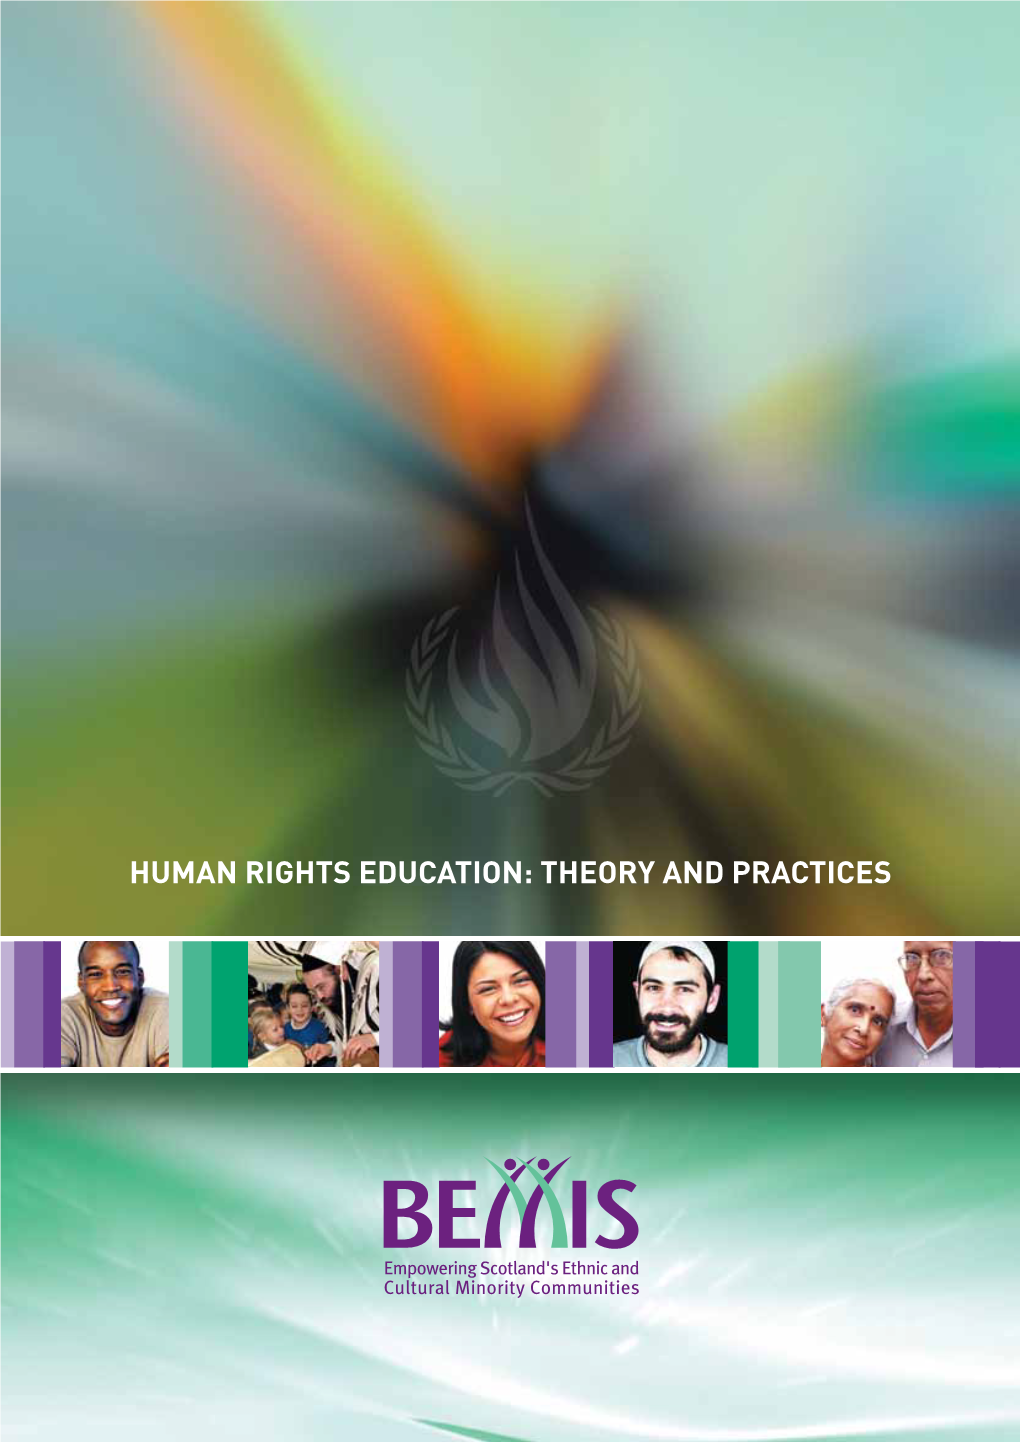 Human Rights Education: Theory and Practices